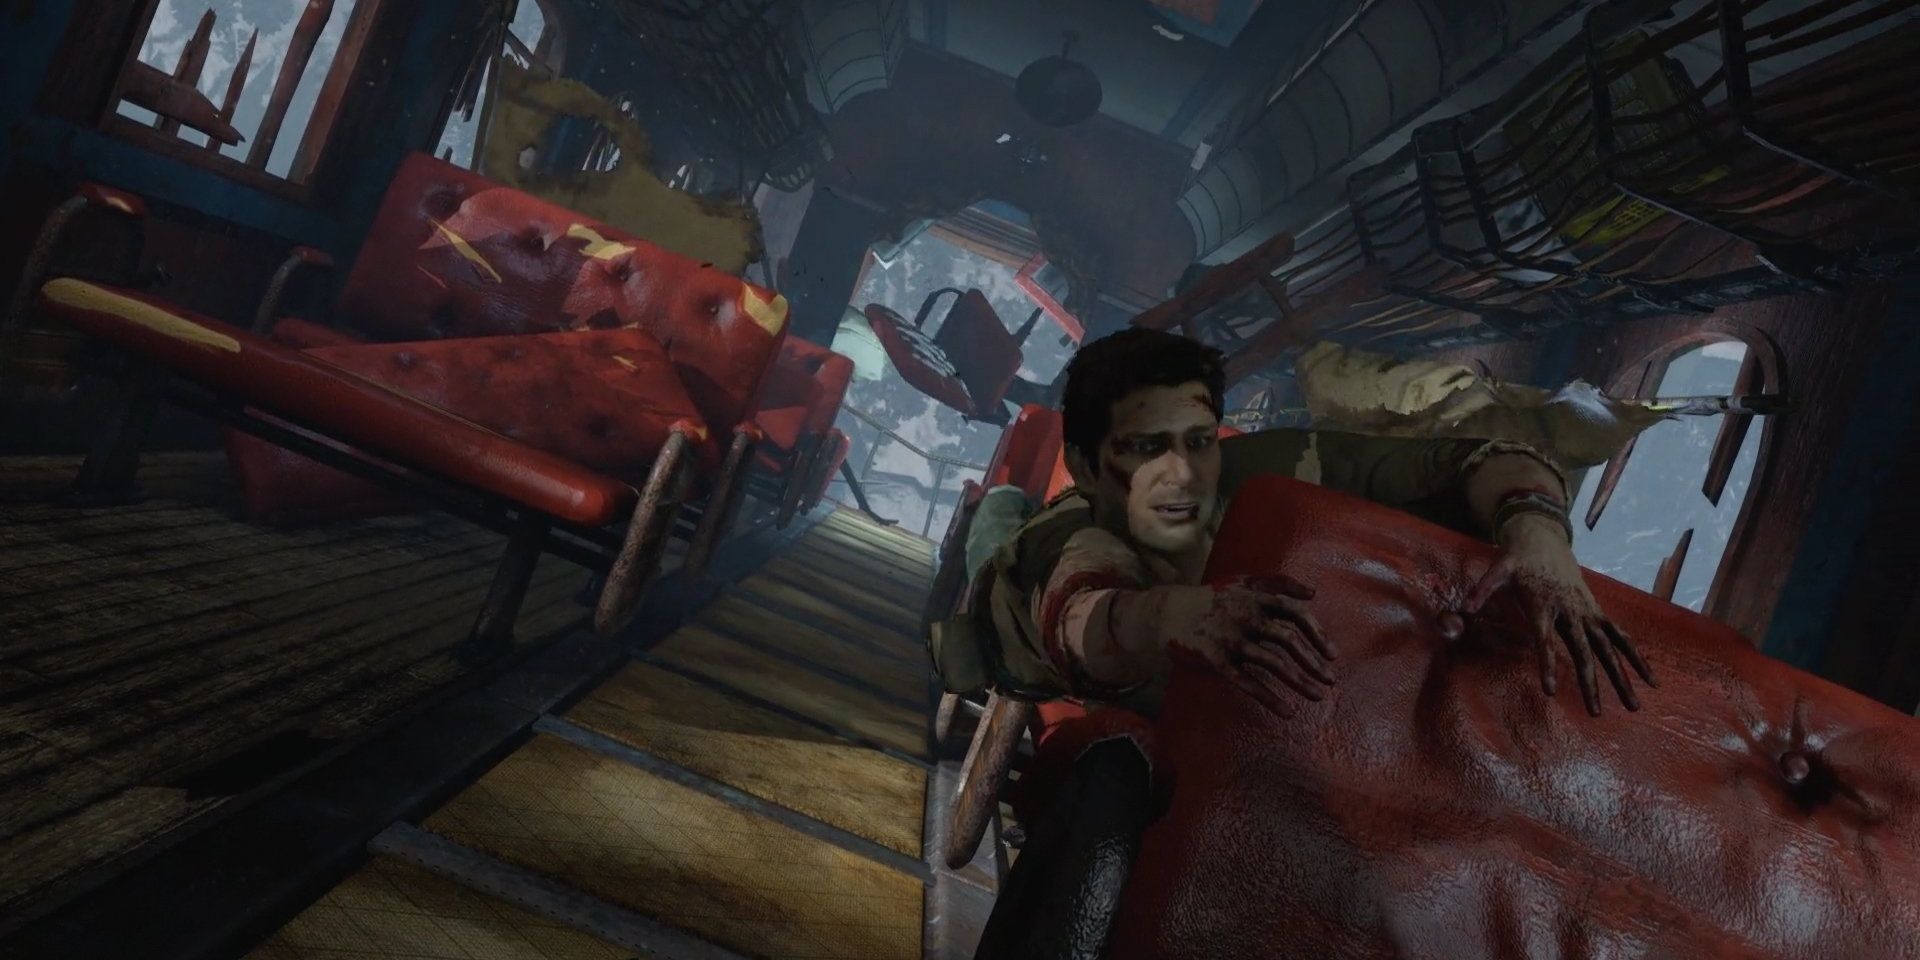 A screenshot showing Nathan hanging inside a wrecked train in Uncharted 2: Among Thieves